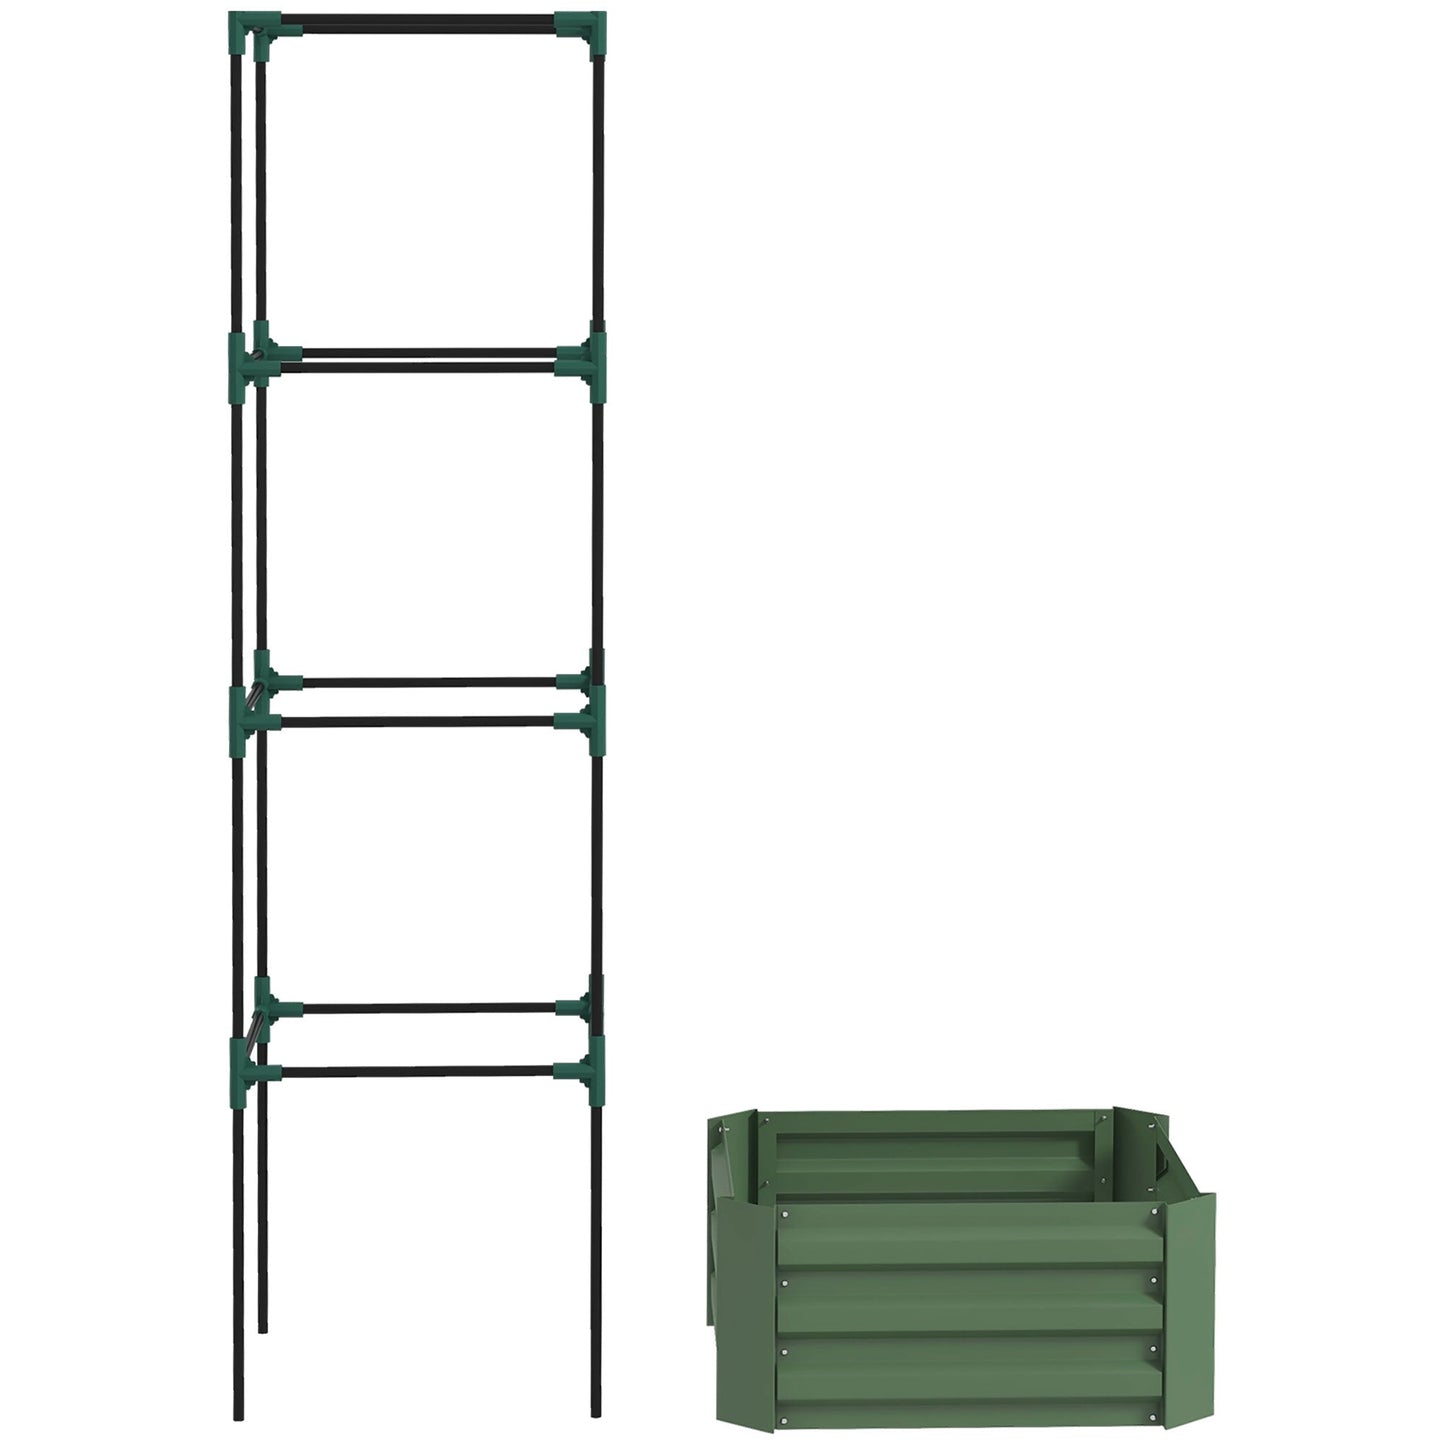 -Outsunny Galvanised Planter Box, 24"x24"x11.75" Raised Garden Bed with Tomato Cage for Climbing Vines, Vegetables, Flowers, Green - Outdoor Style Company